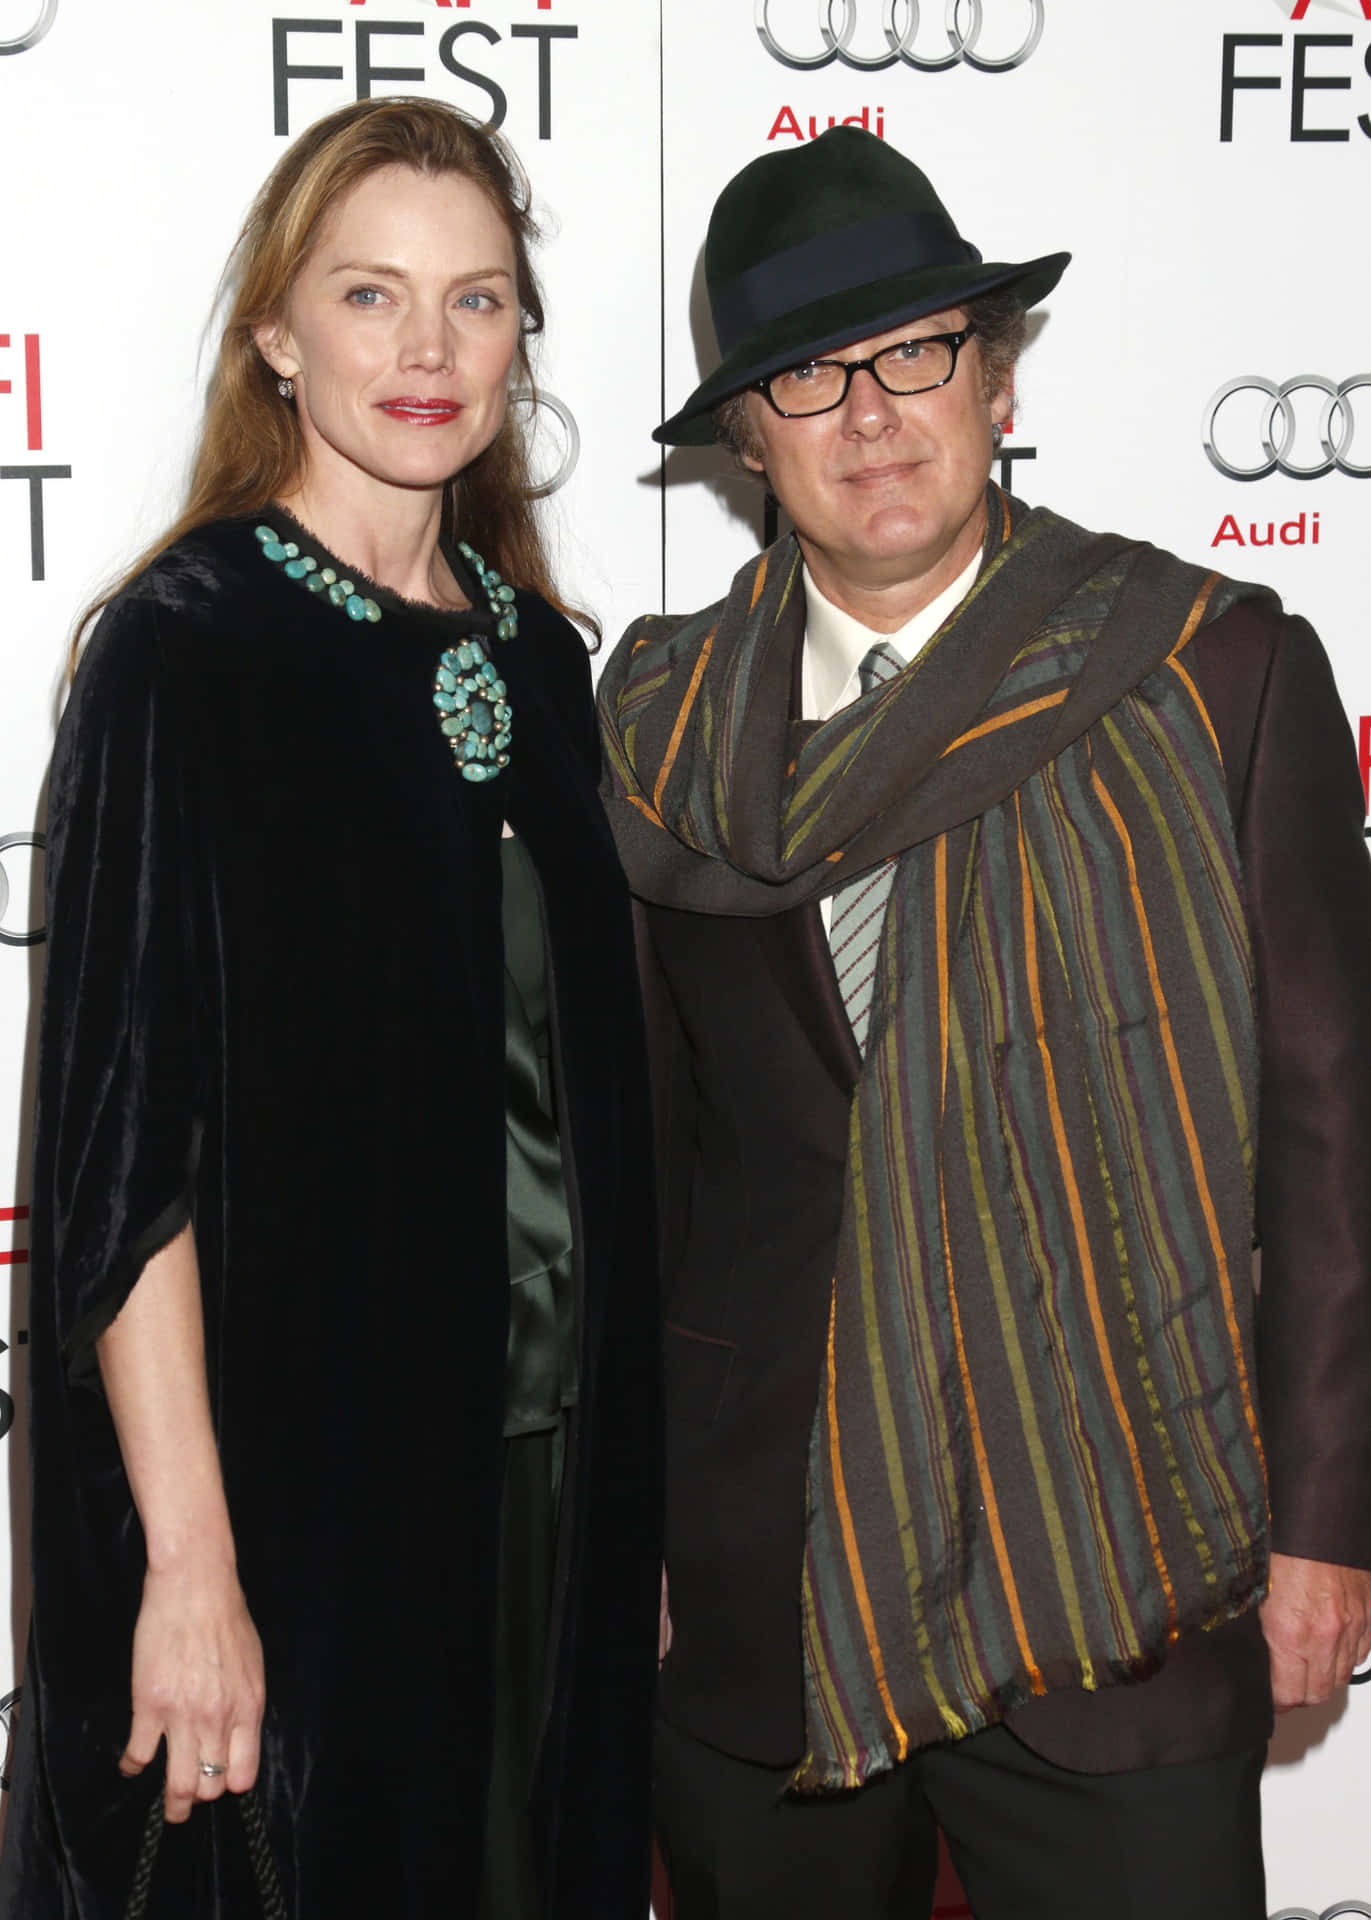 Renowned Actor James Spader At An Event